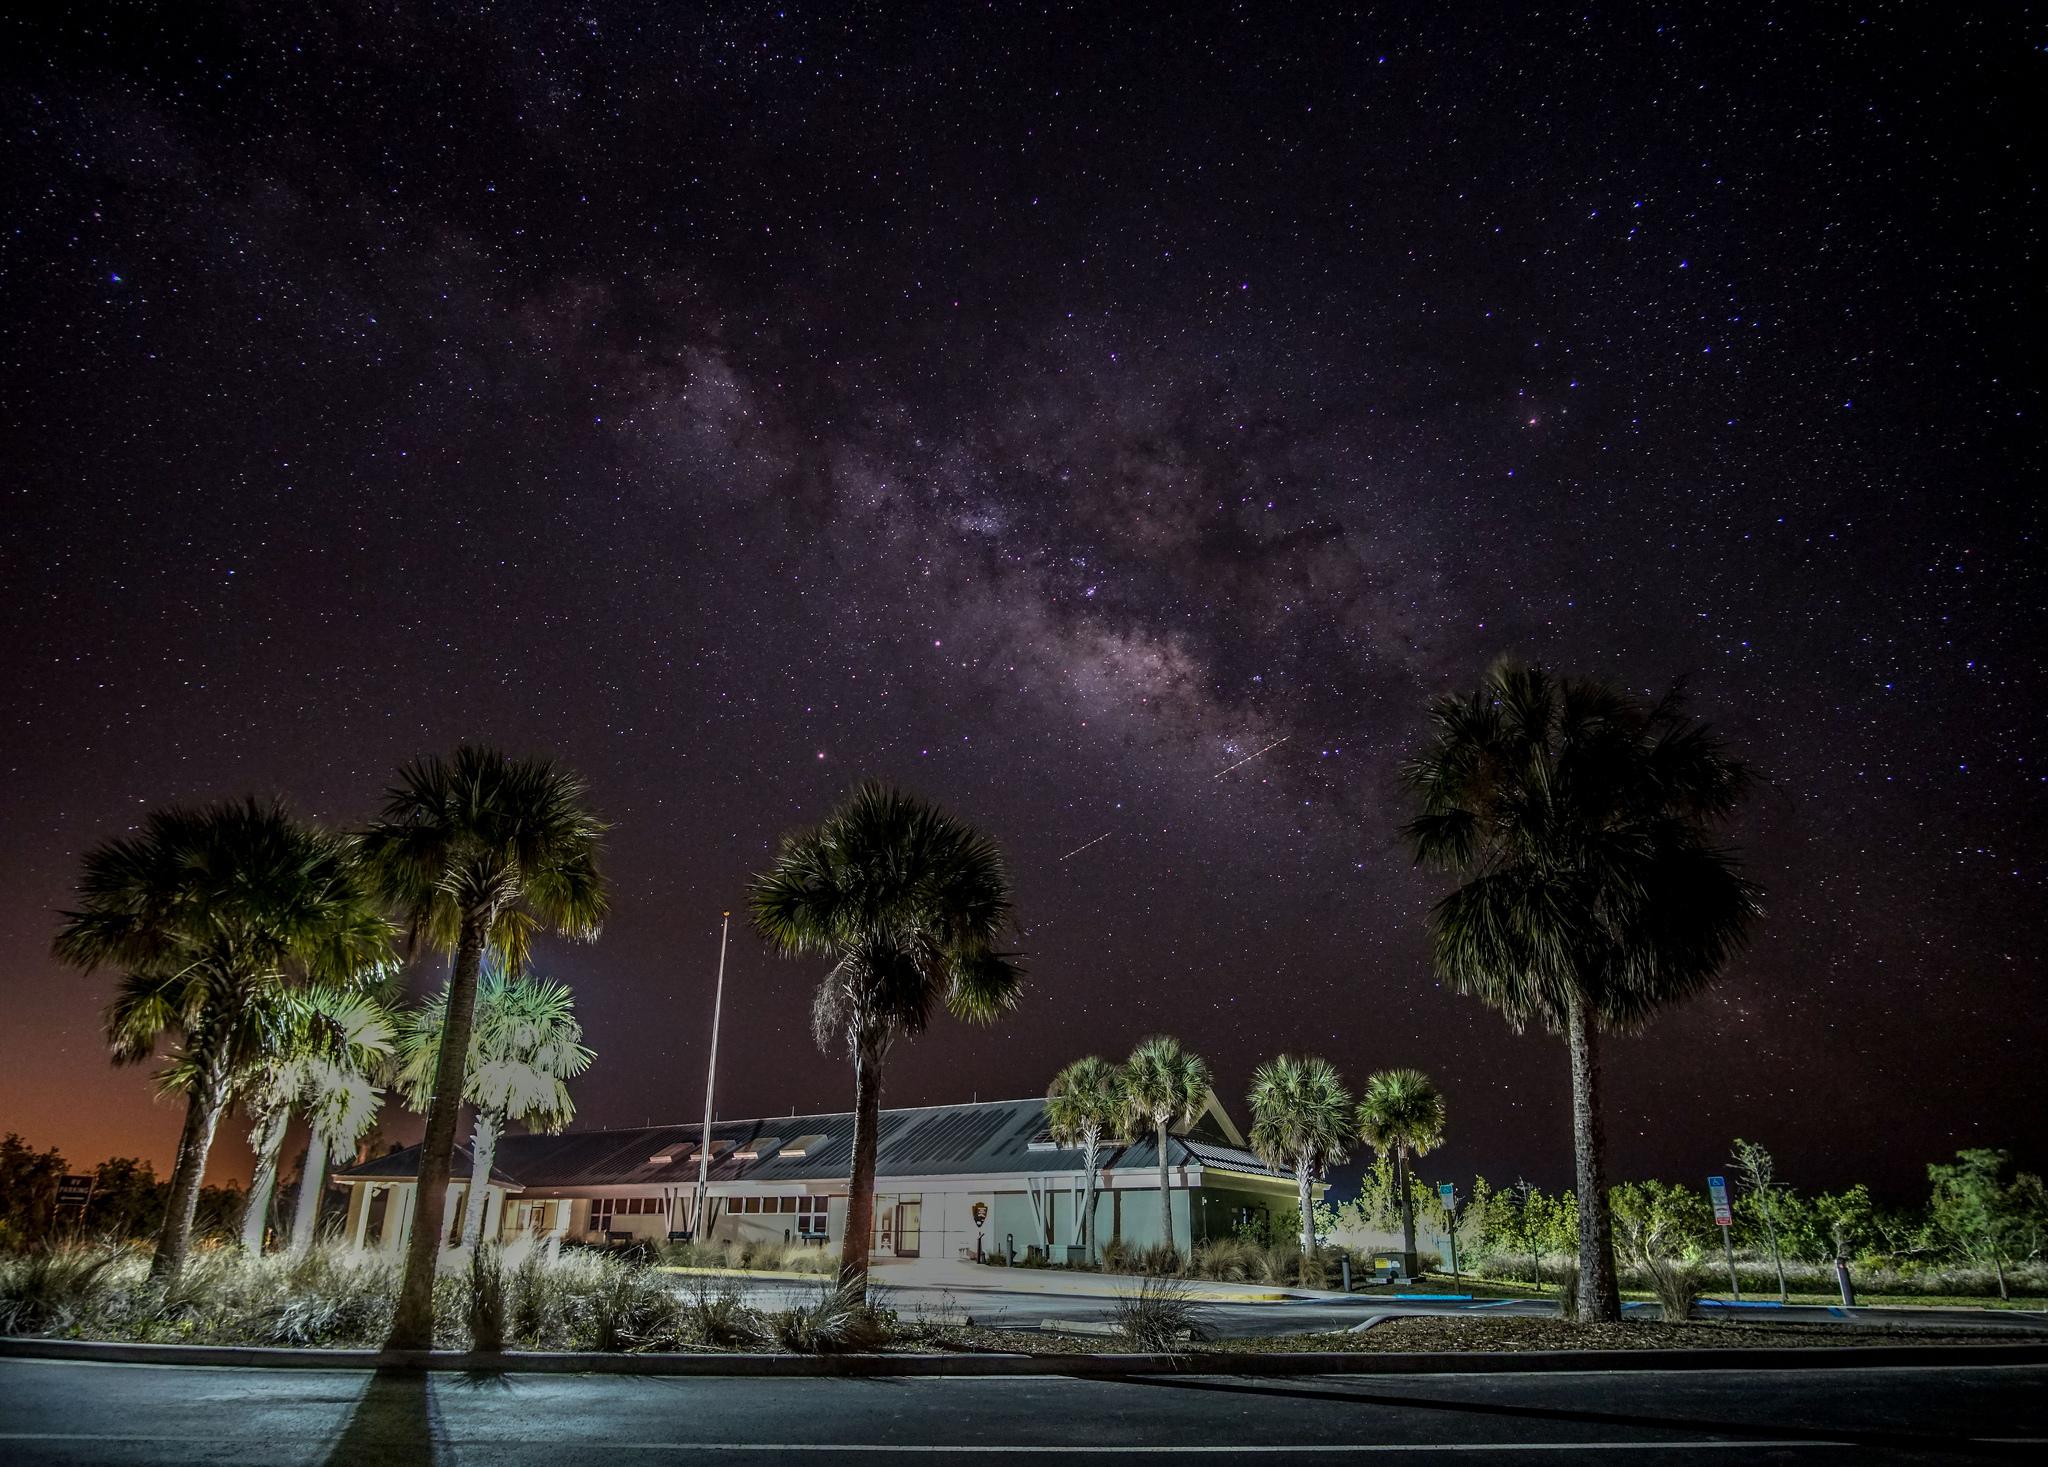 Visitor Center illuminated at night with night sky visible and palm trees in the foreground